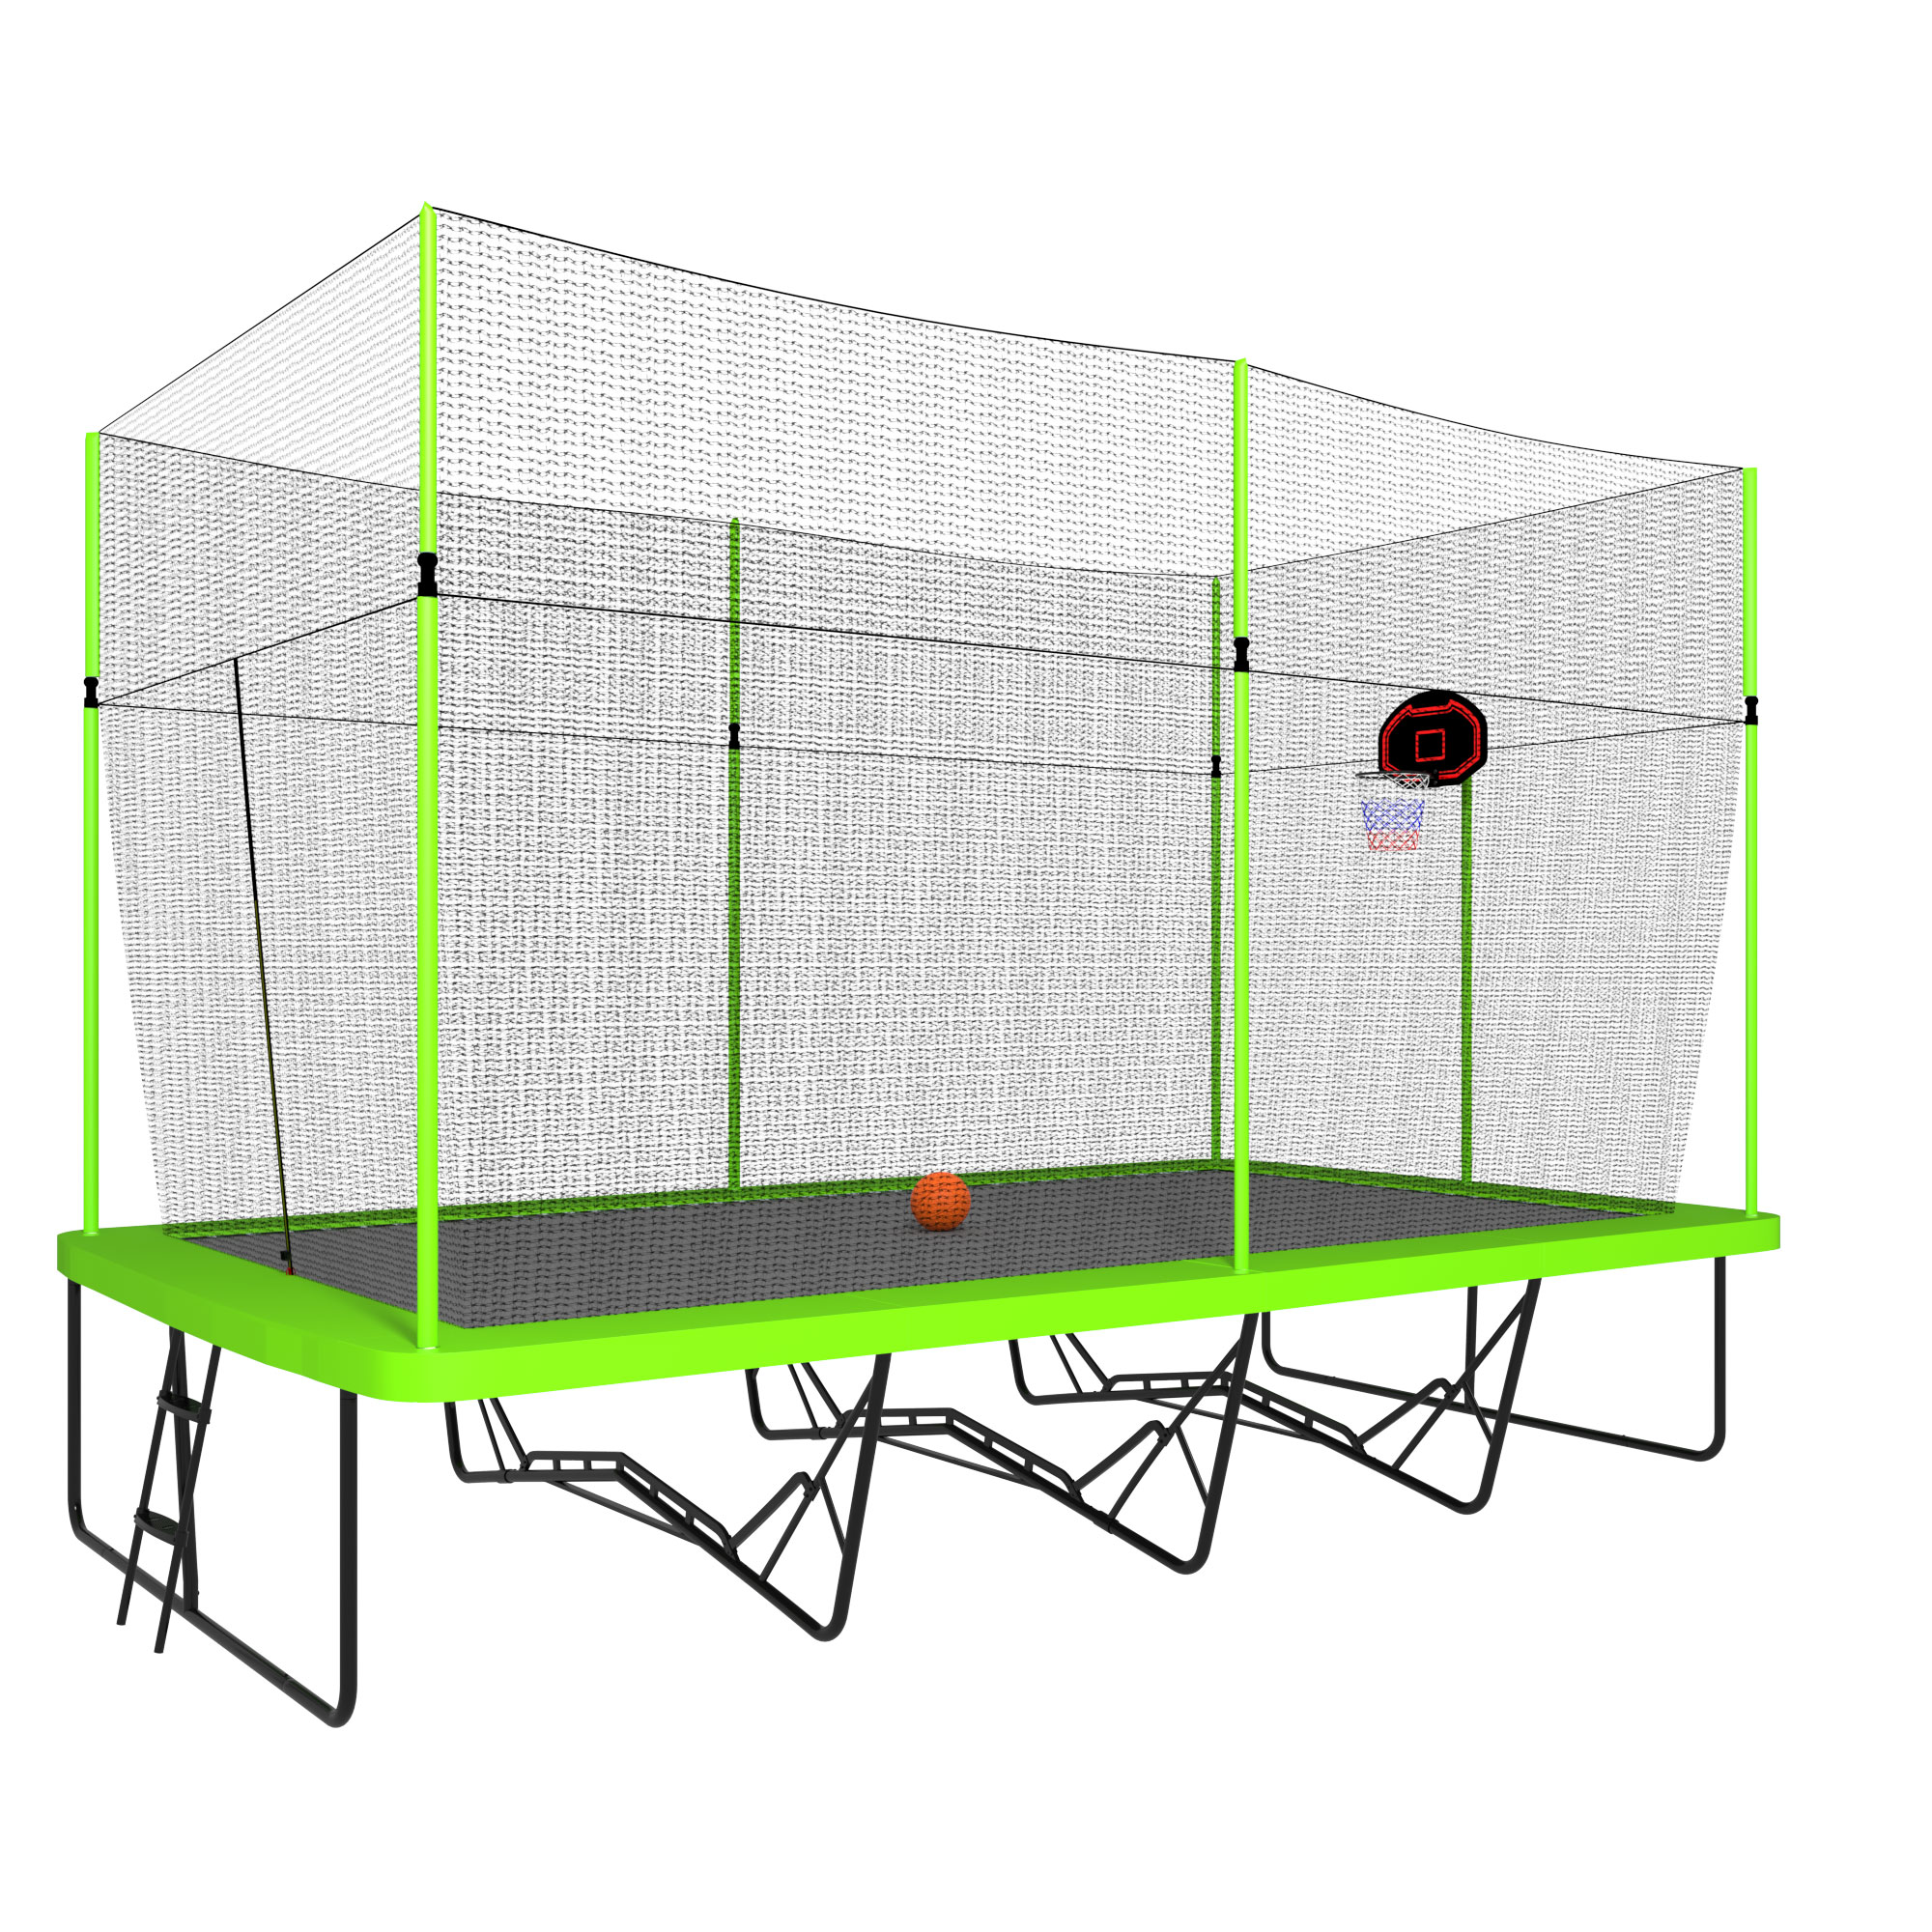 Dcenta 10ft by 17ft Rectangule Trampoline with Green Fabric Black Powder-coated Galvanized Steel Tubes with Basketball Hoop System Ladder - image 2 of 7